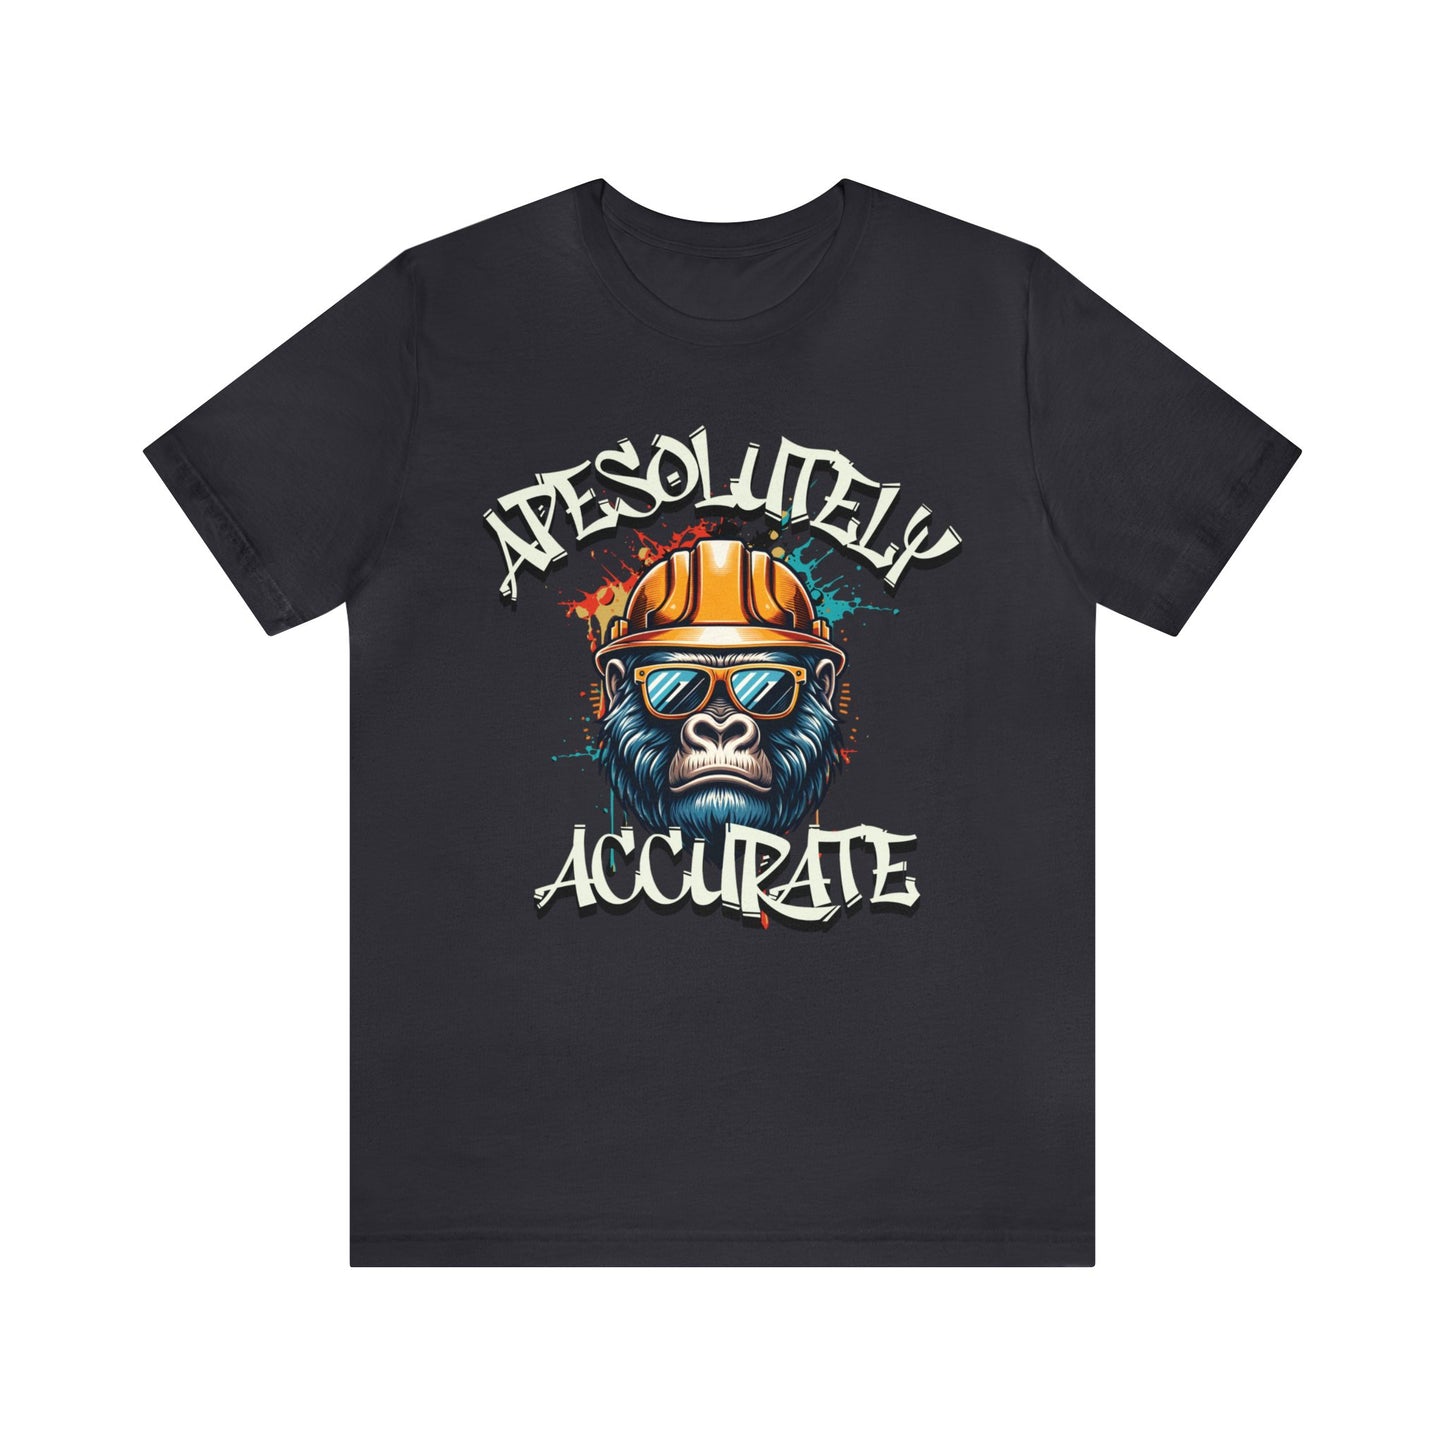 APESOLUTELY ACCURATE Short Sleeve Tee